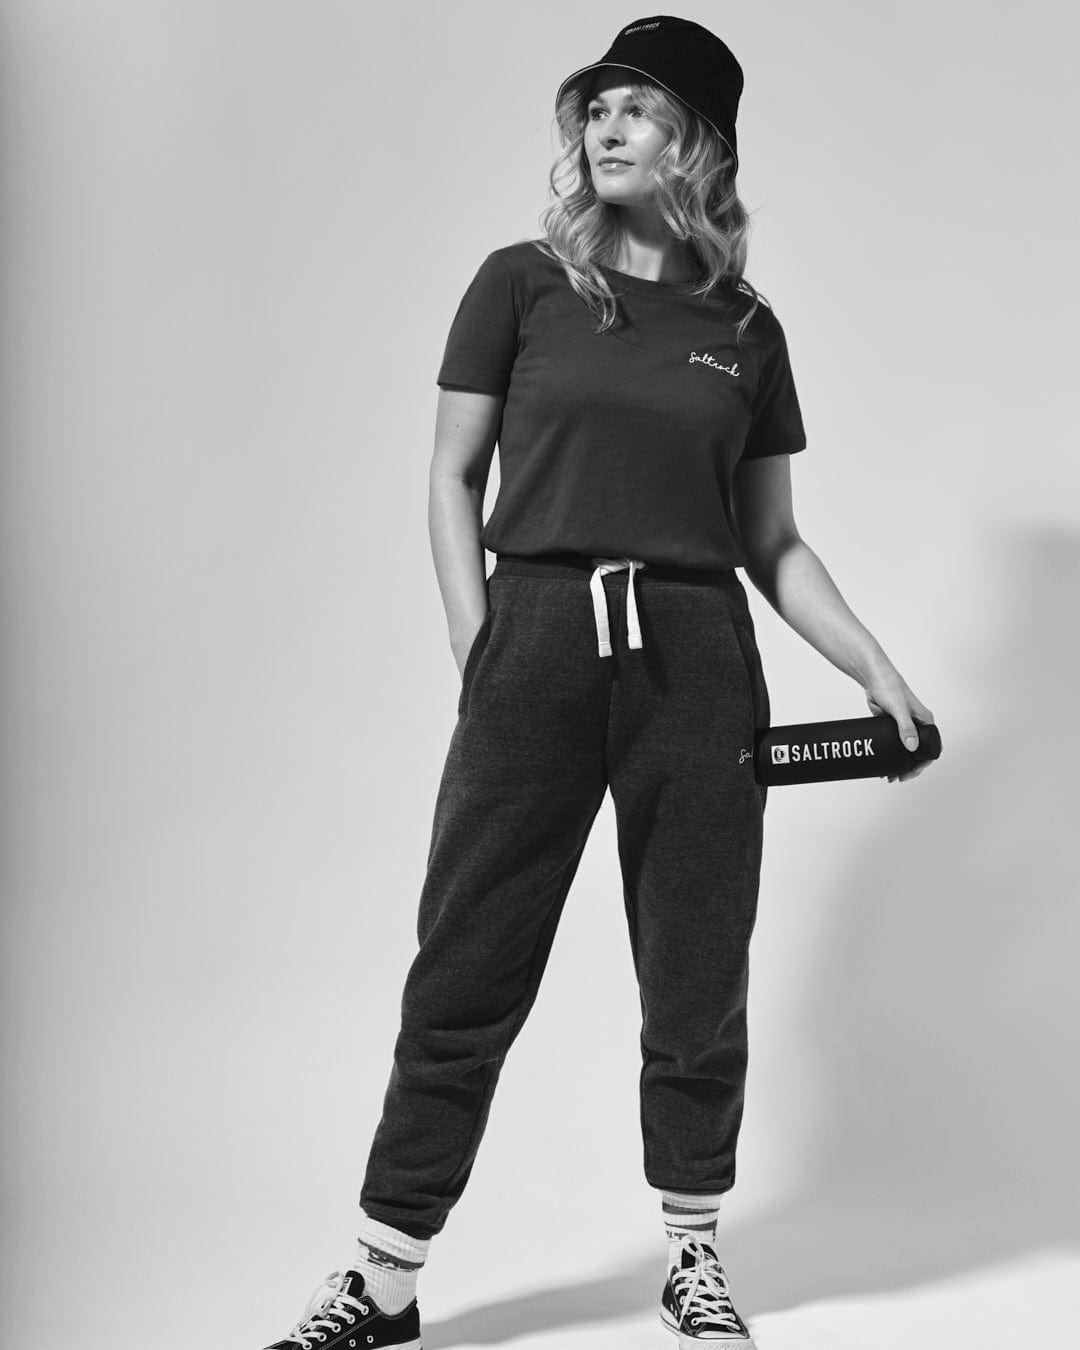 A woman in casual sportswear, including a cap and Velator Joggers in Blue with cuffed ankles, stands confidently in a black-and-white photo. She holds a book with "Saltrock" visible on the cover.